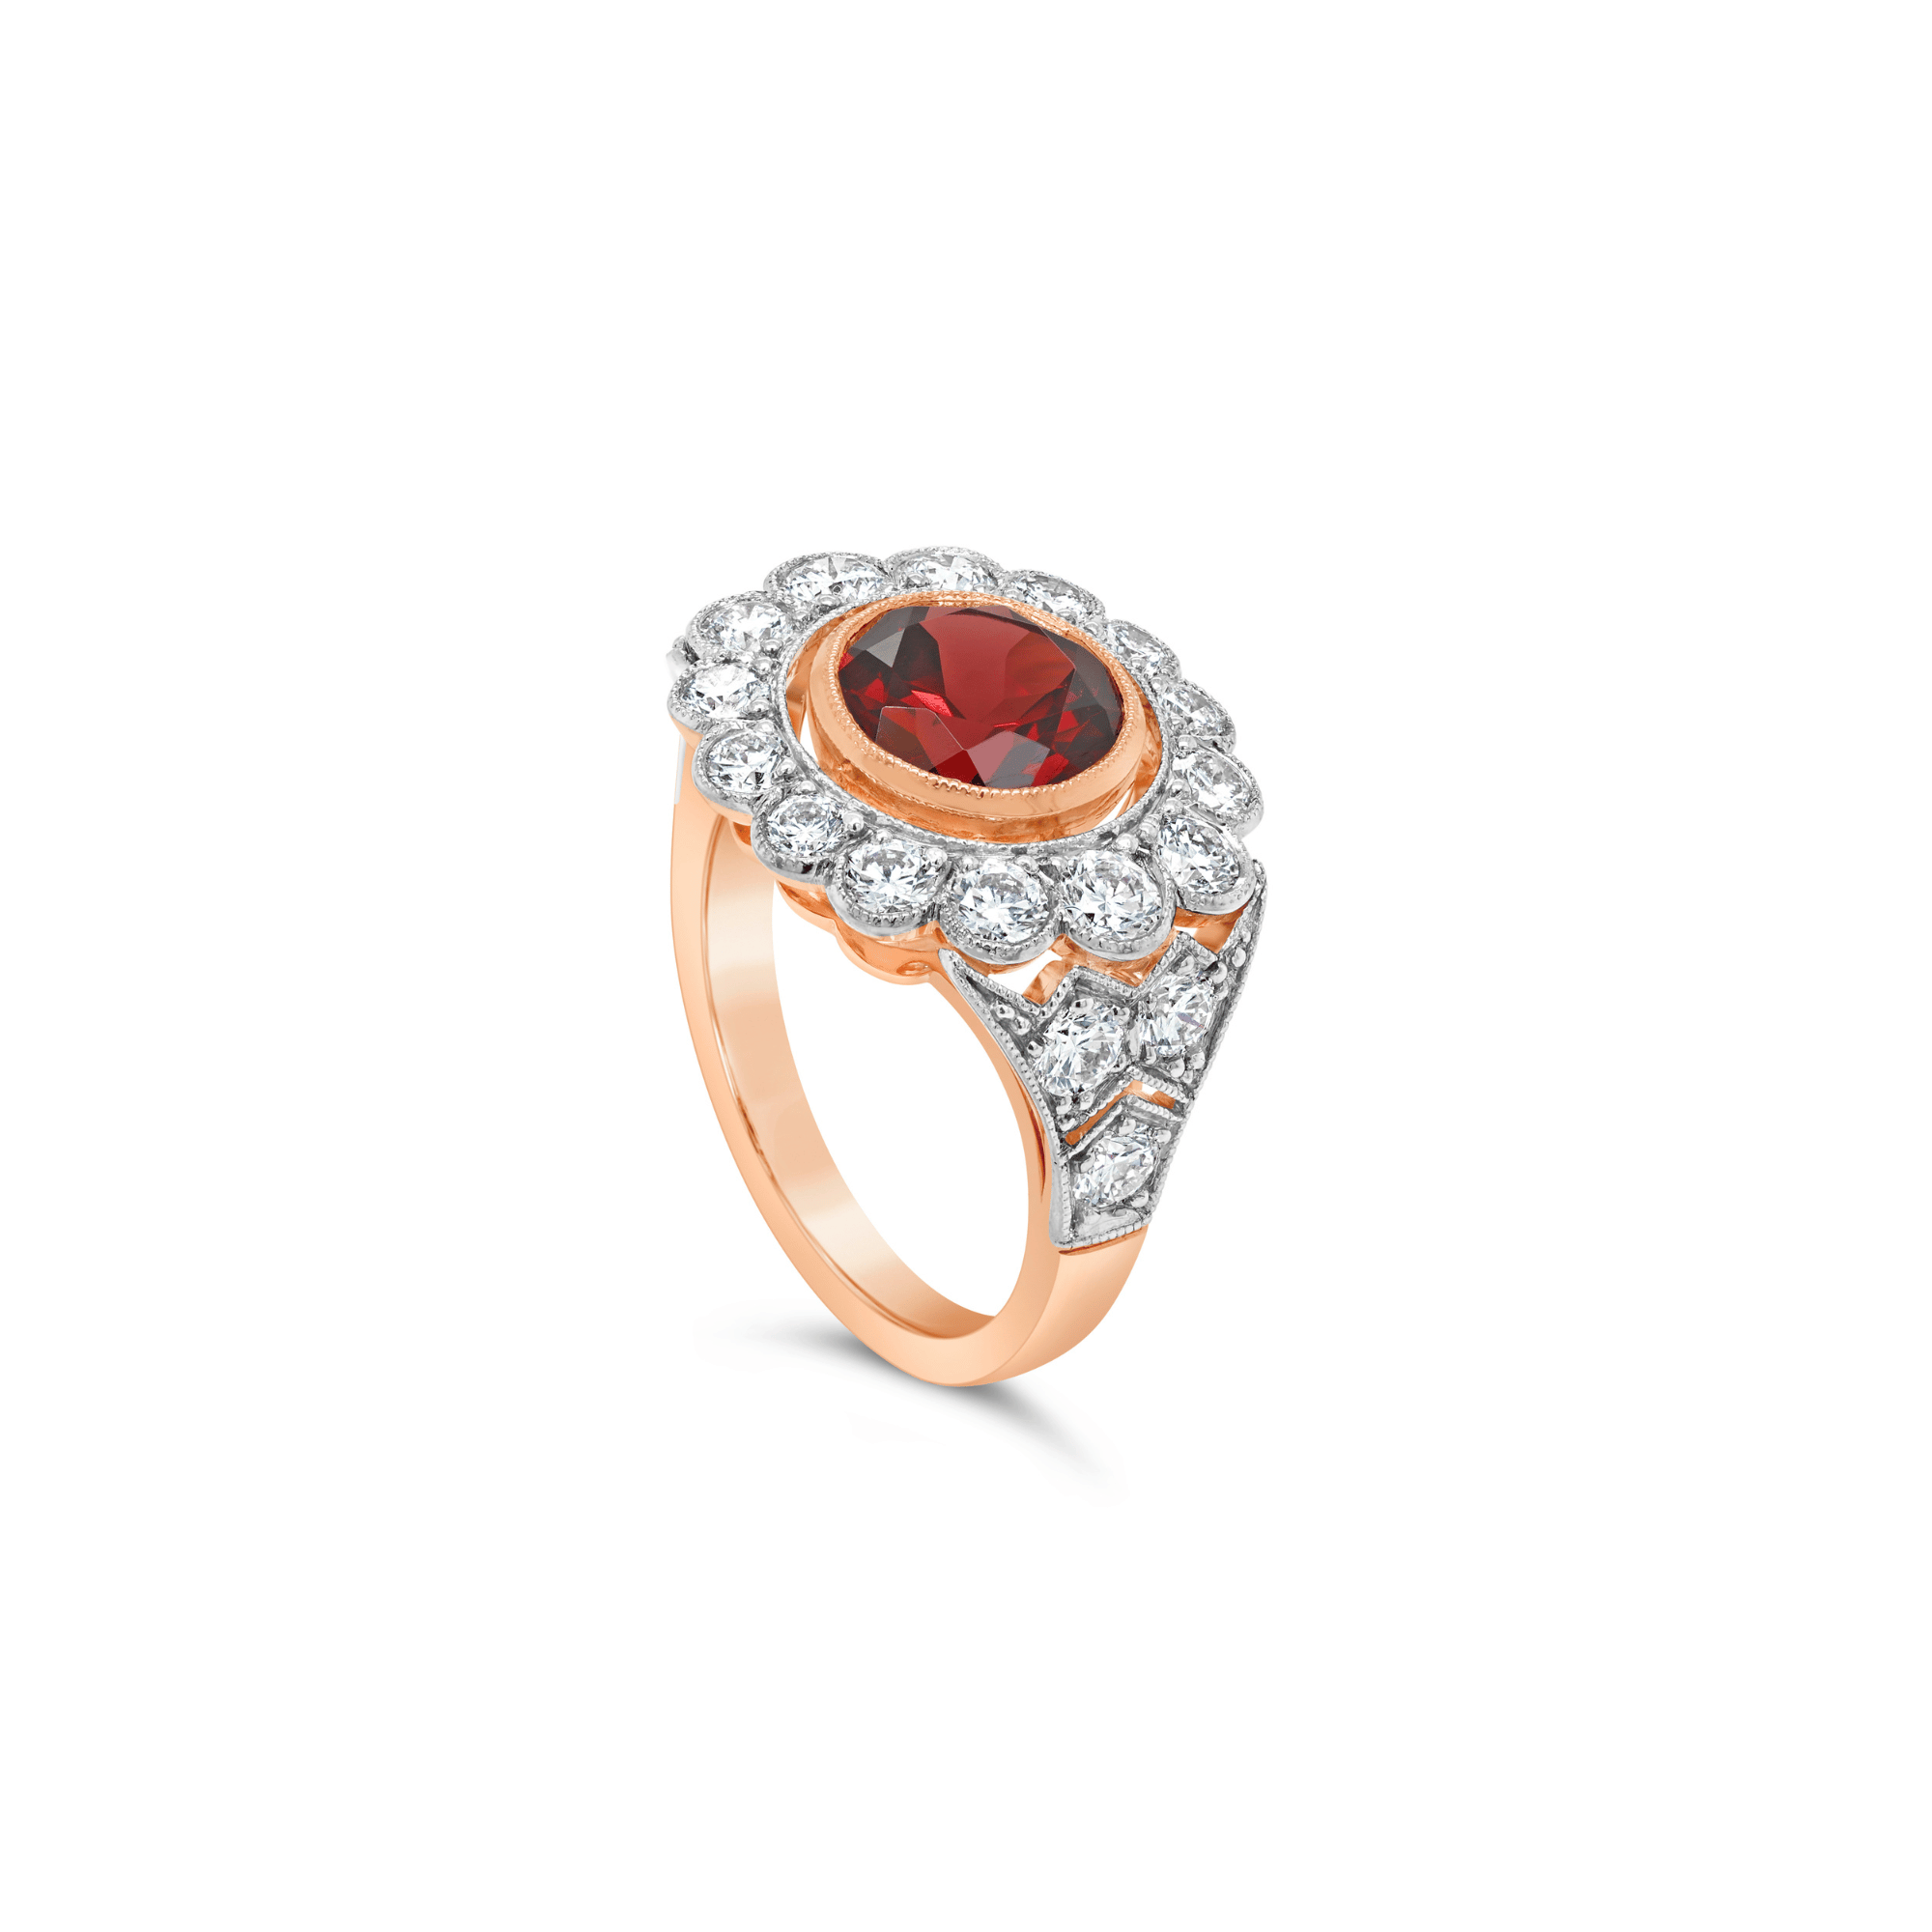 Red Garnet and Diamond Ring in white and rose gold